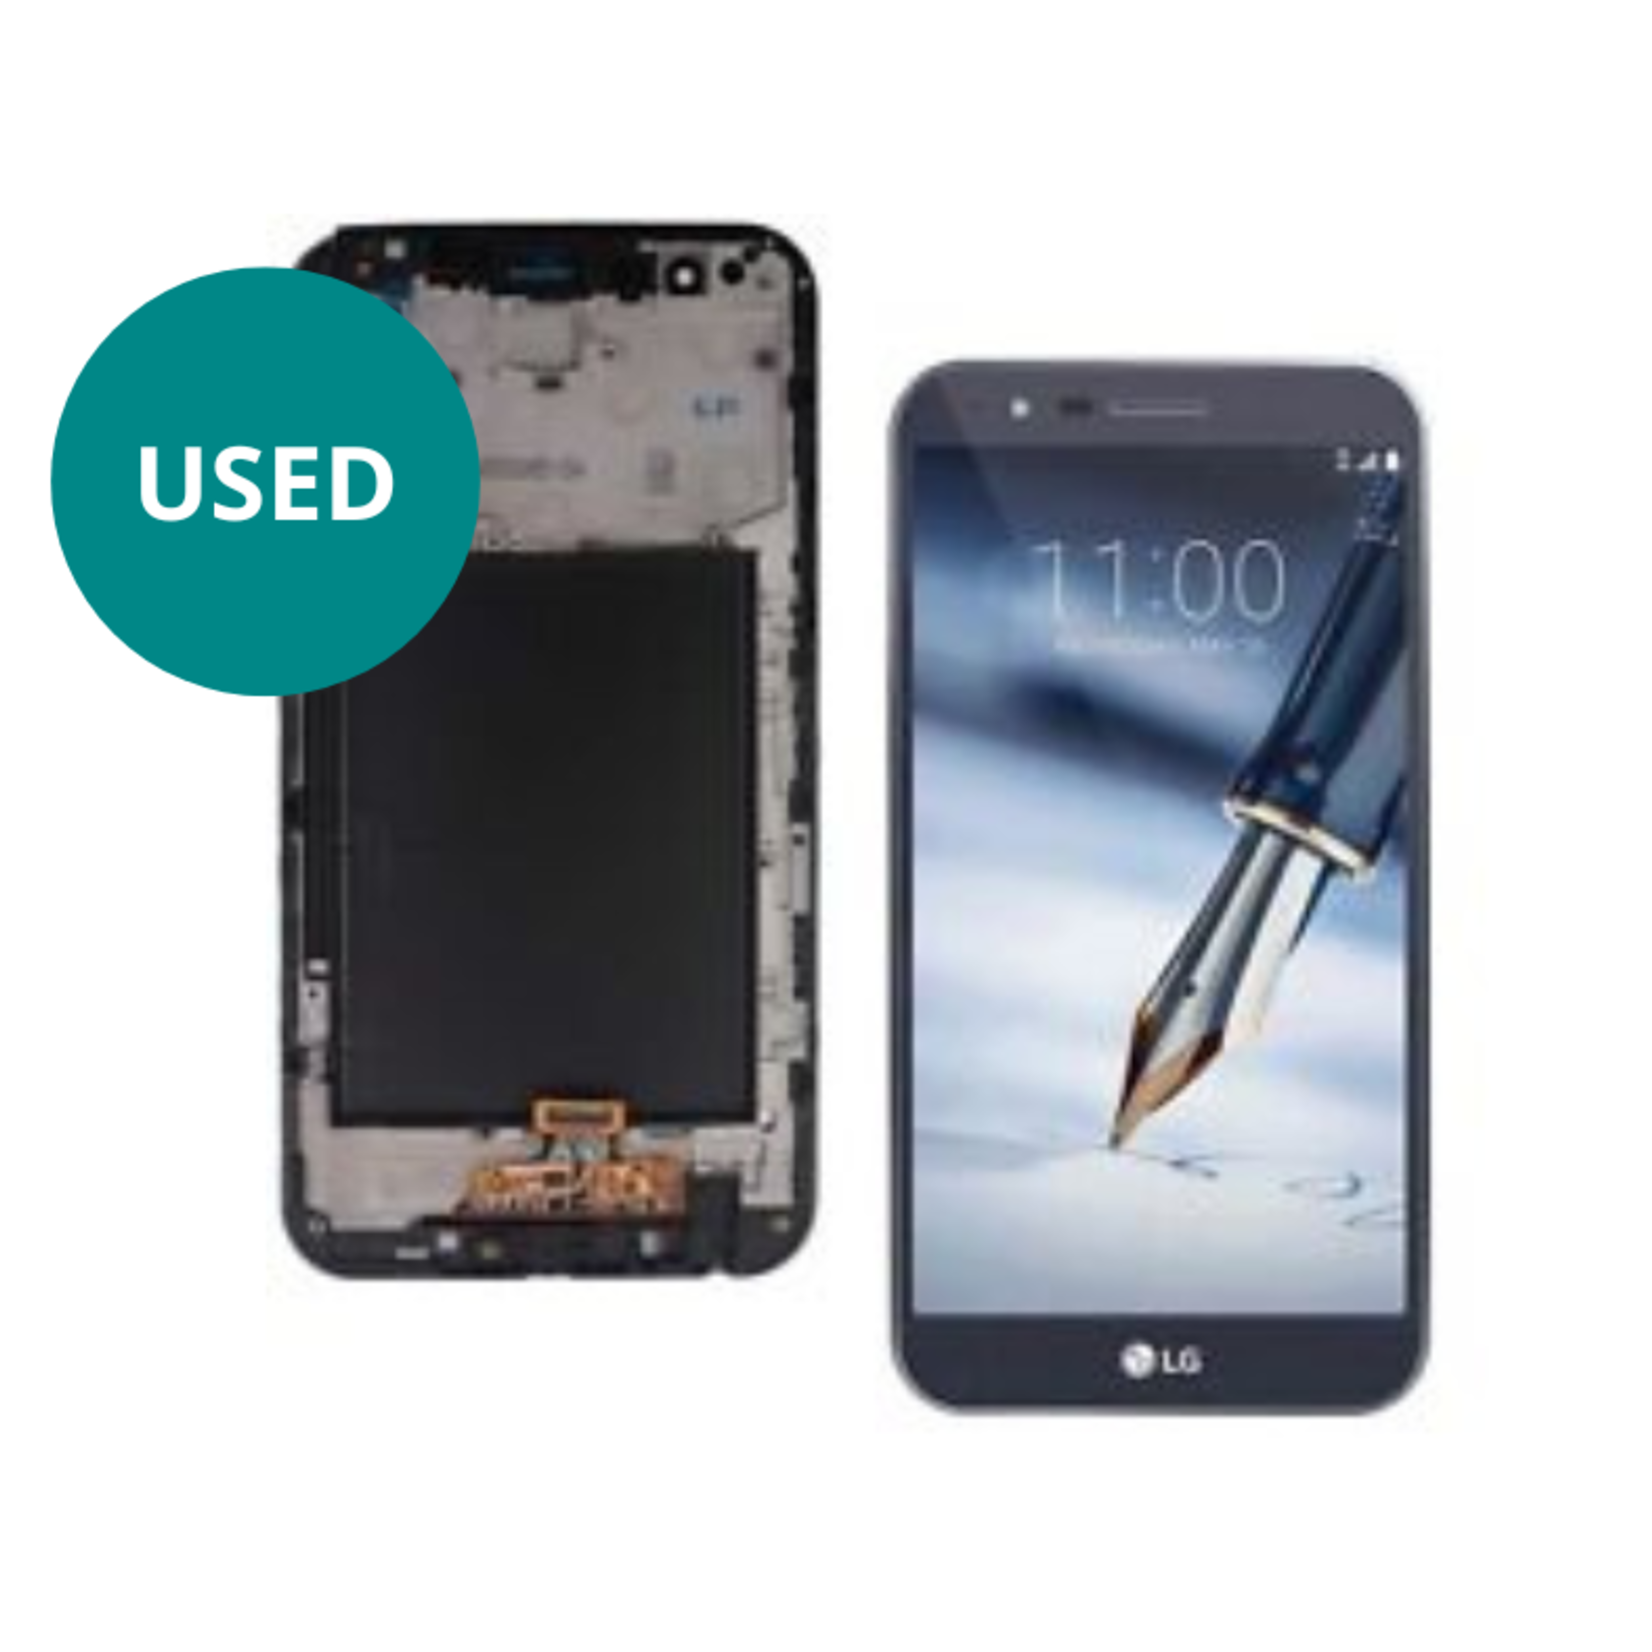 LG USED - LCD DIGITIZER ASSEMBLY WITH FRAME GRAY LG STYLO 3 PLUS